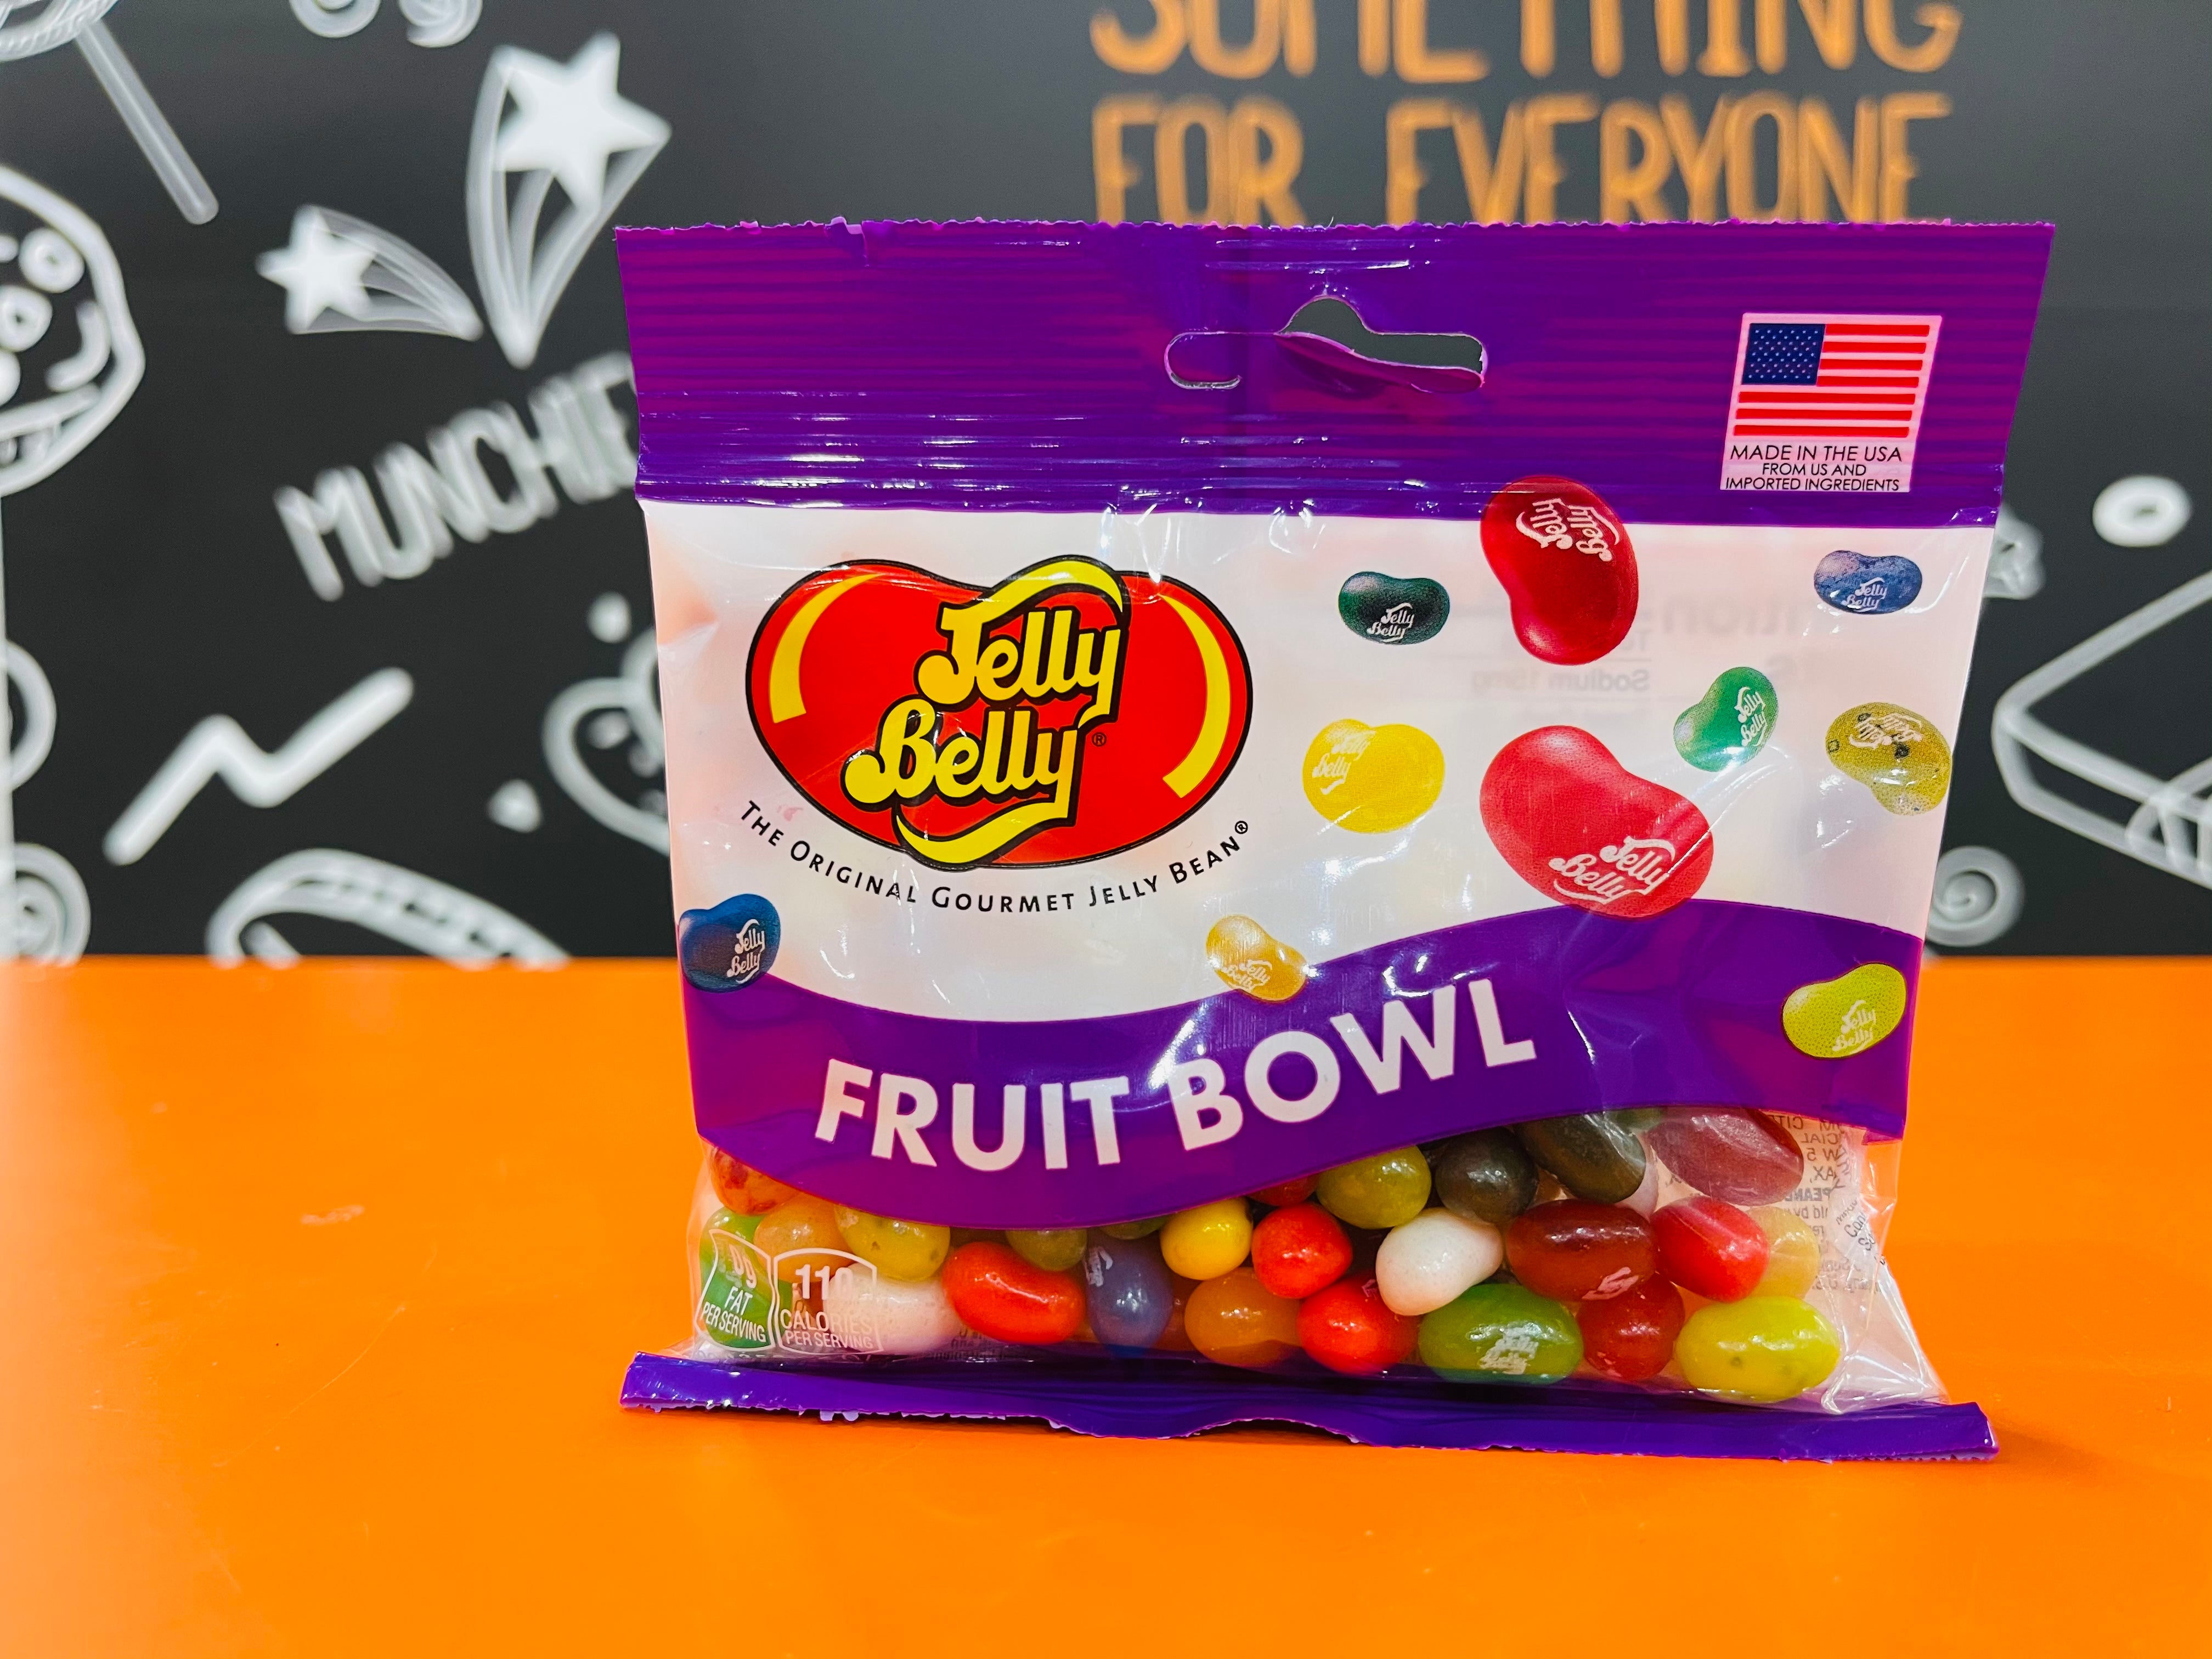 Jelly Belly Fruit Bowl